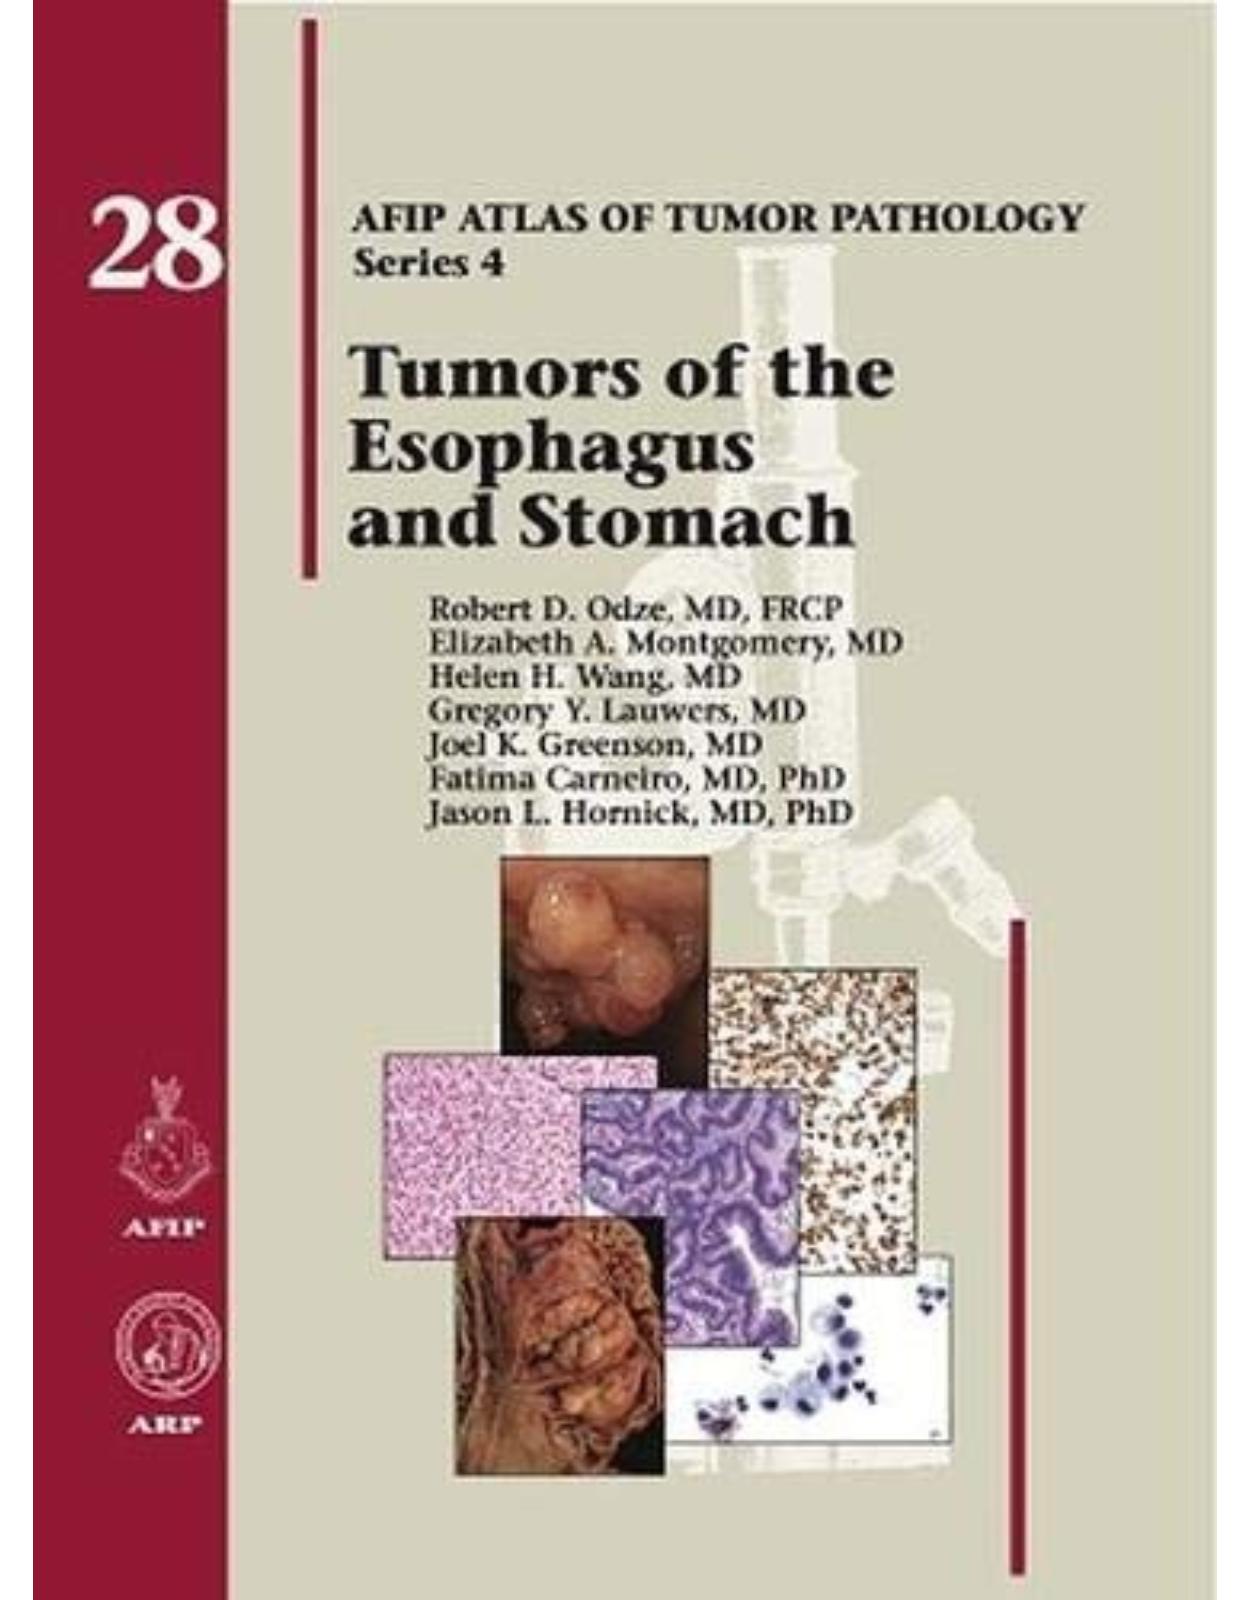 Tumors of the Esophagus and Stomach (AFIP Atlas of Tumor Pathology, Series 4,)